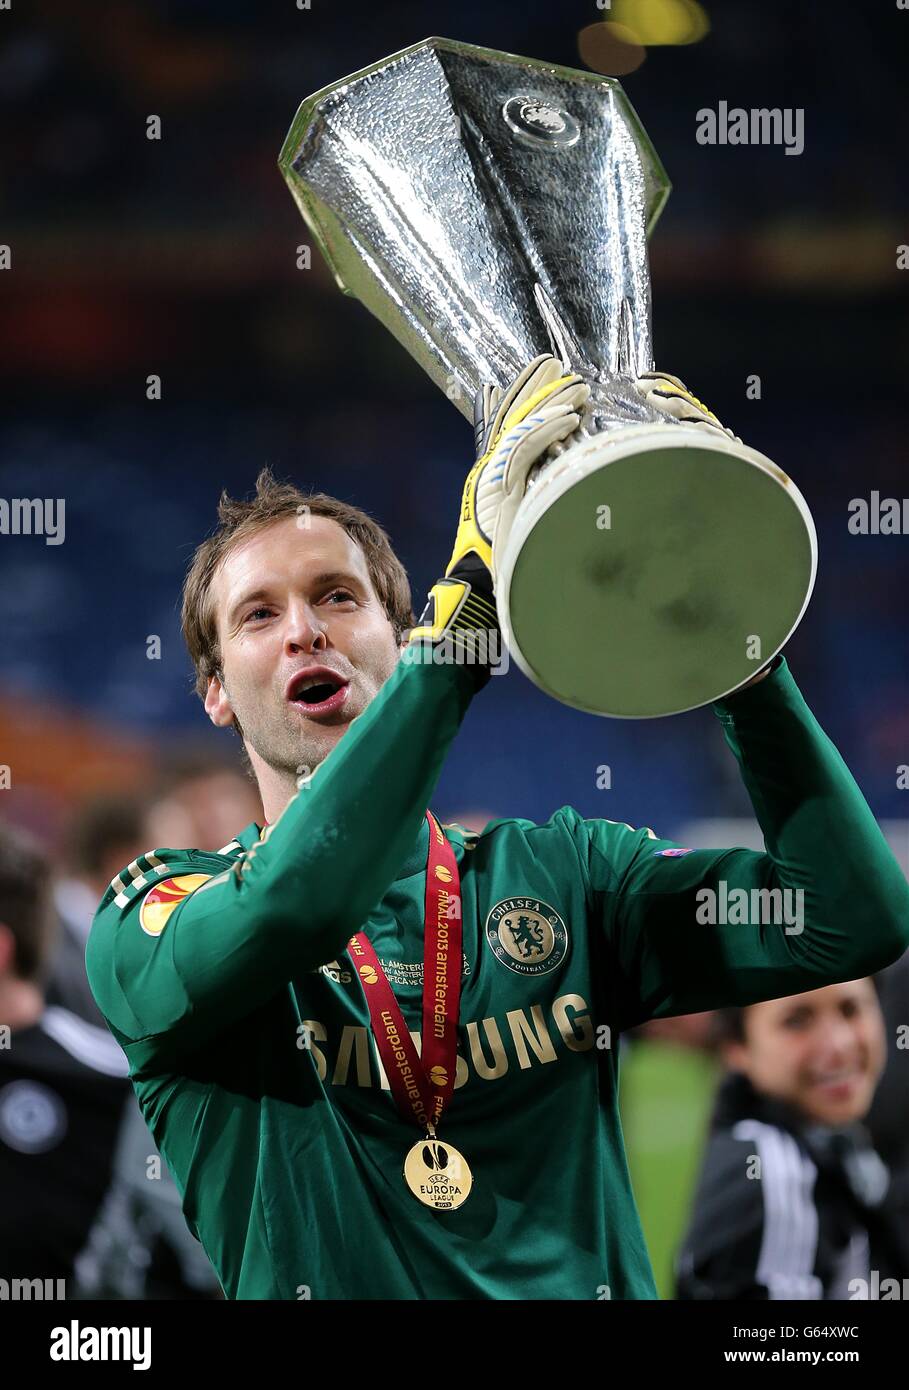 Chelsea goalkeeper Petr Cech celebrates with the UEFA Europa League trophy Stock Photo